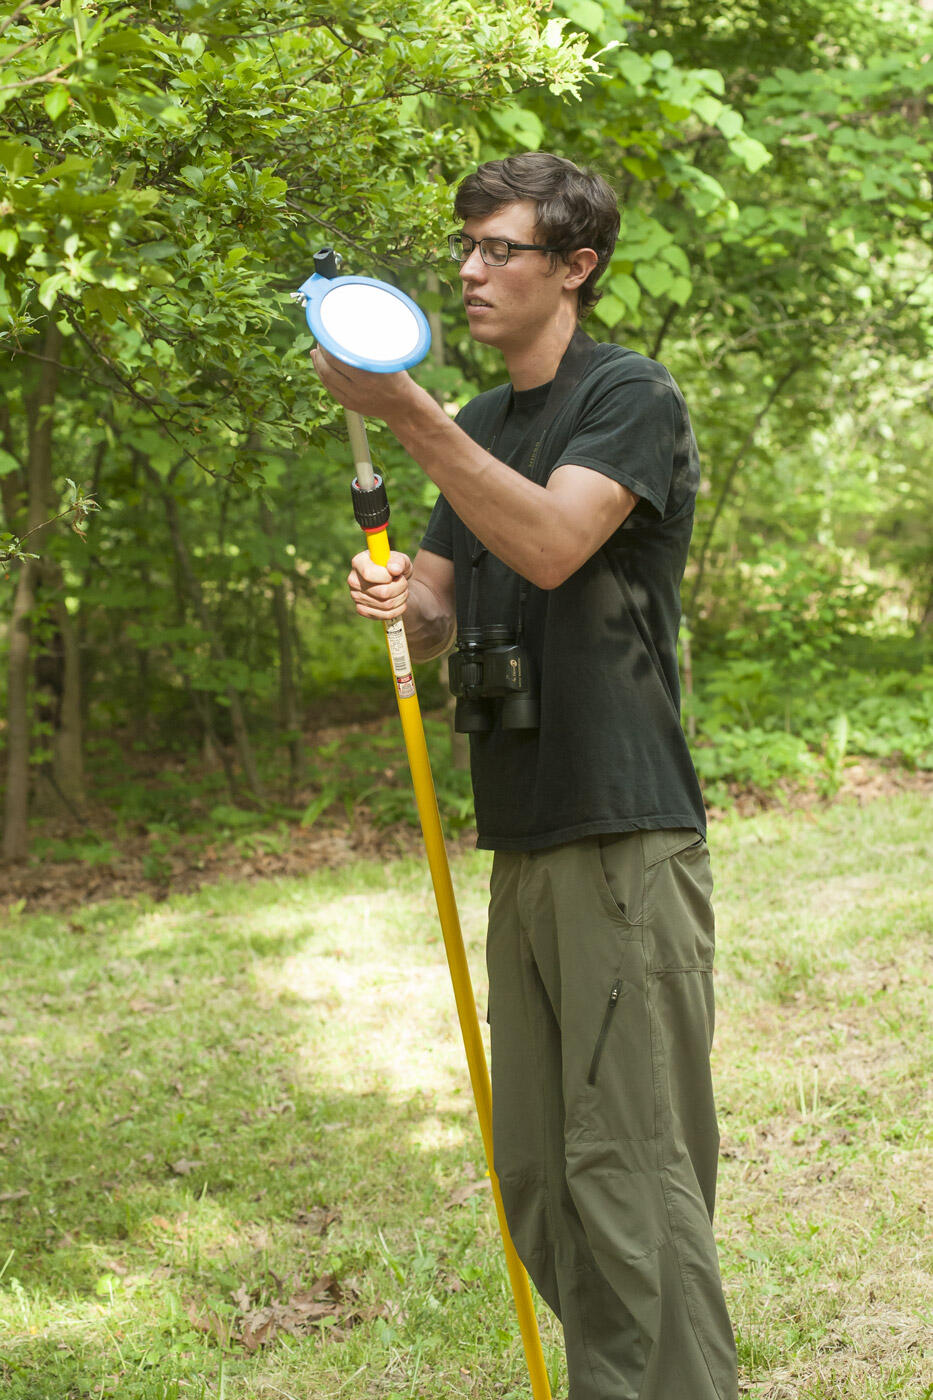 Dan Finnell, a senior environmental studies major, prepares to use an extendable mirror, which the team sometimes uses to check out out-of-reach nests.